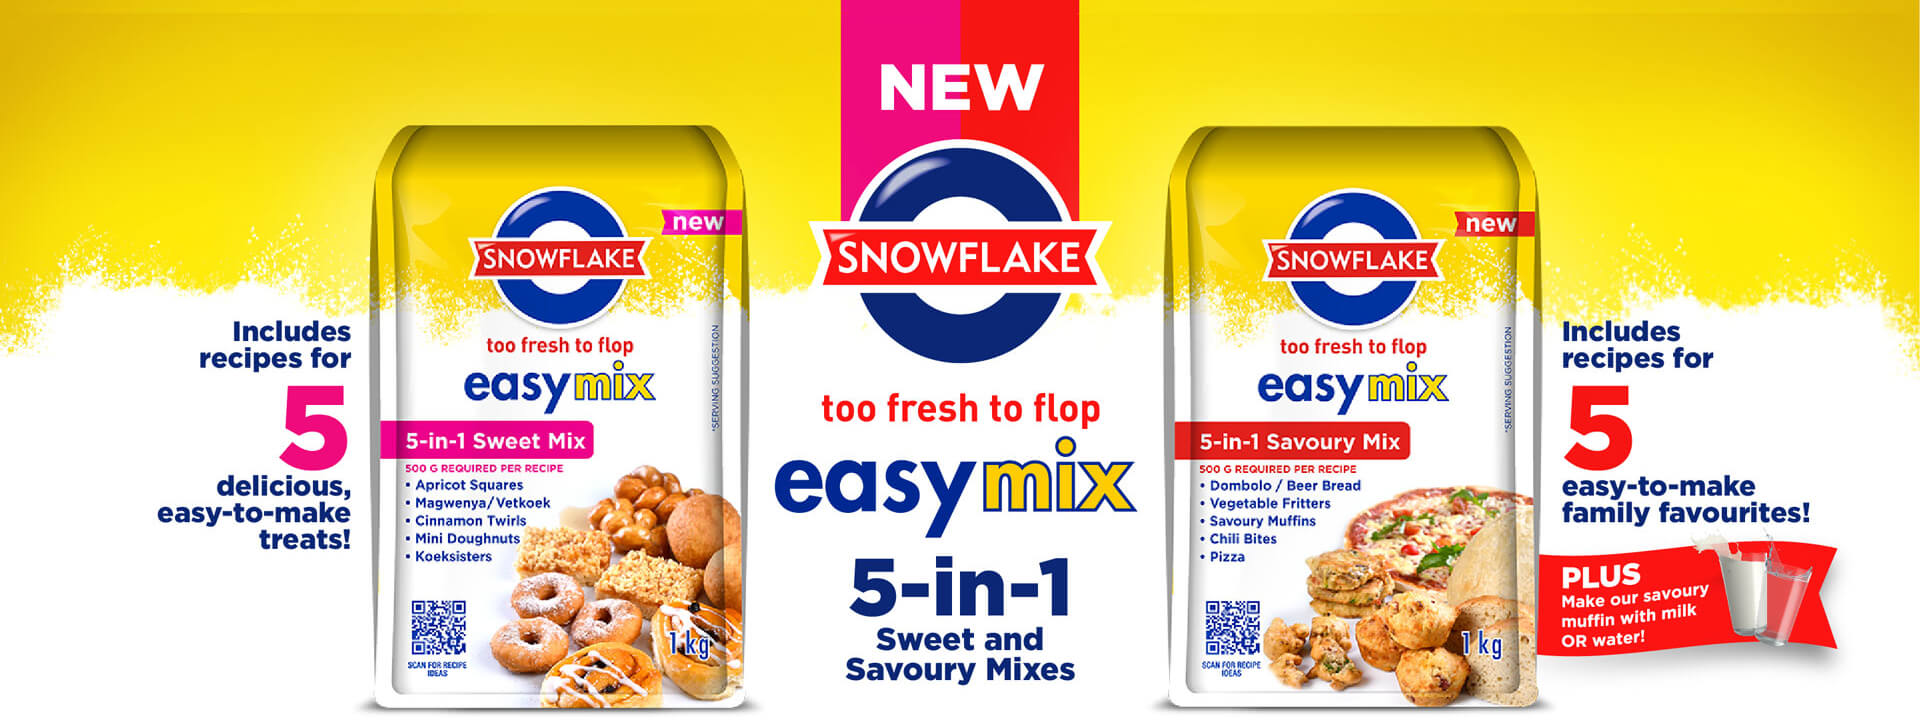 New Products - Easymix Sweet and Easymix Savoury